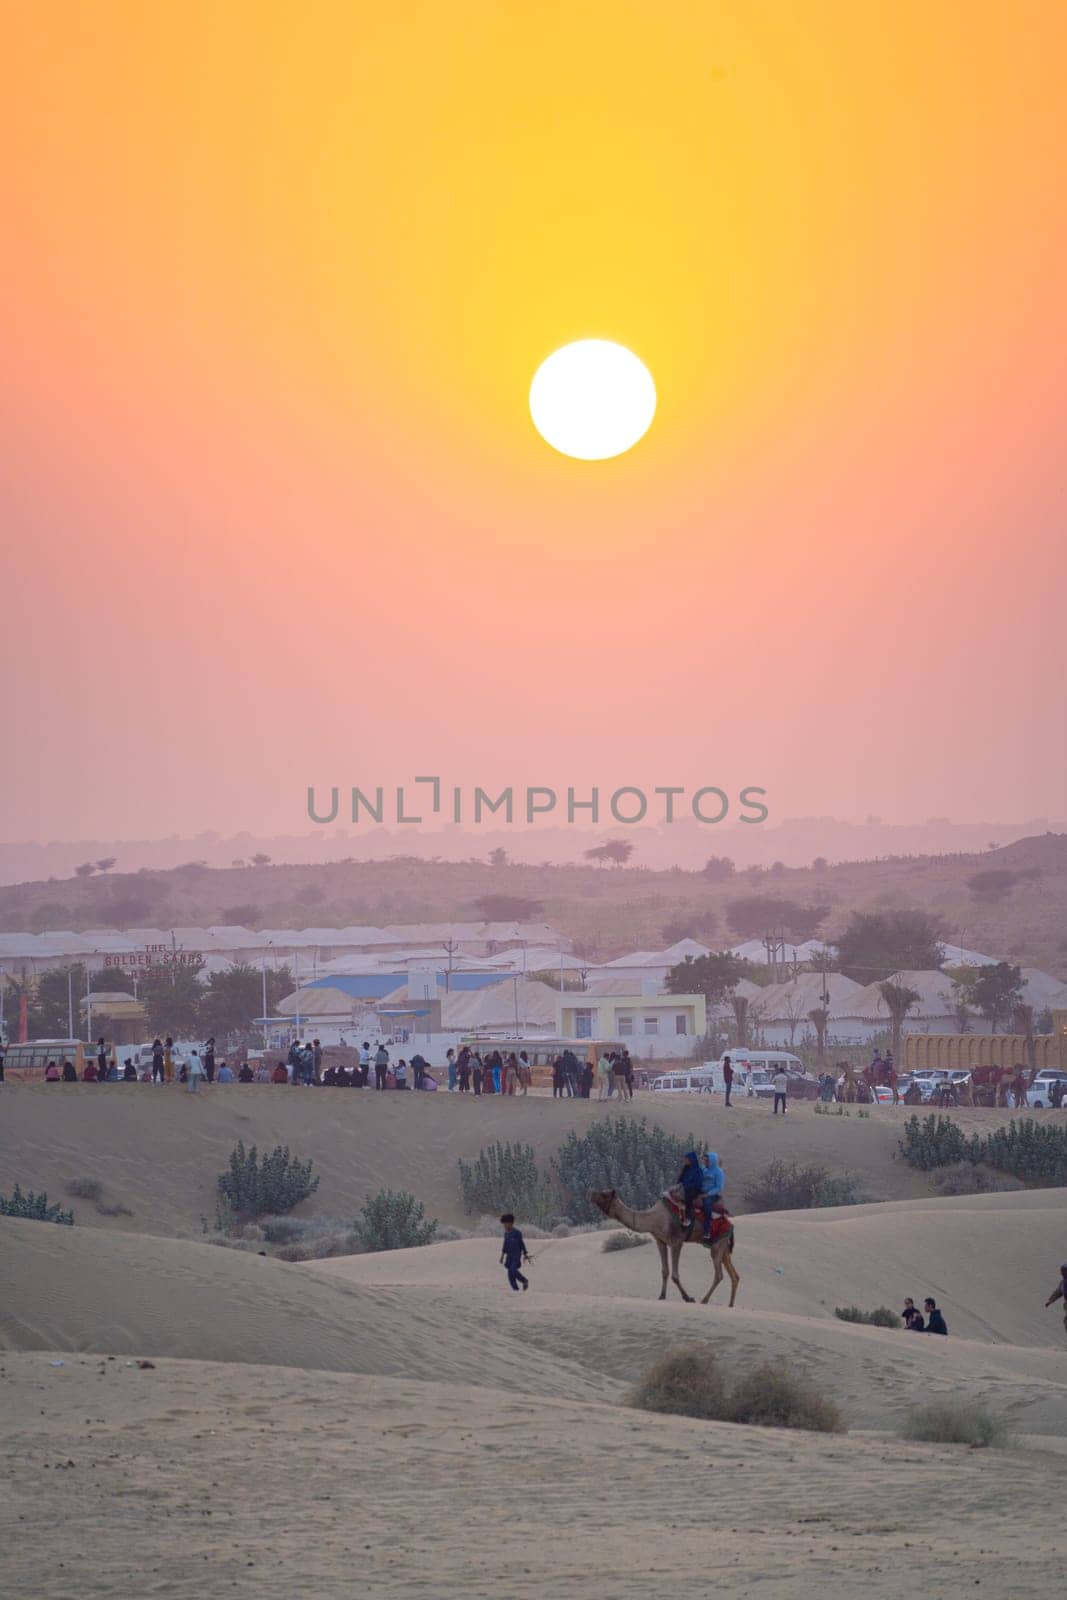 line of camels carrying people tourists at sunset across thar desert in jaisalmer rajasthan showing a popular tourist activity by Shalinimathur